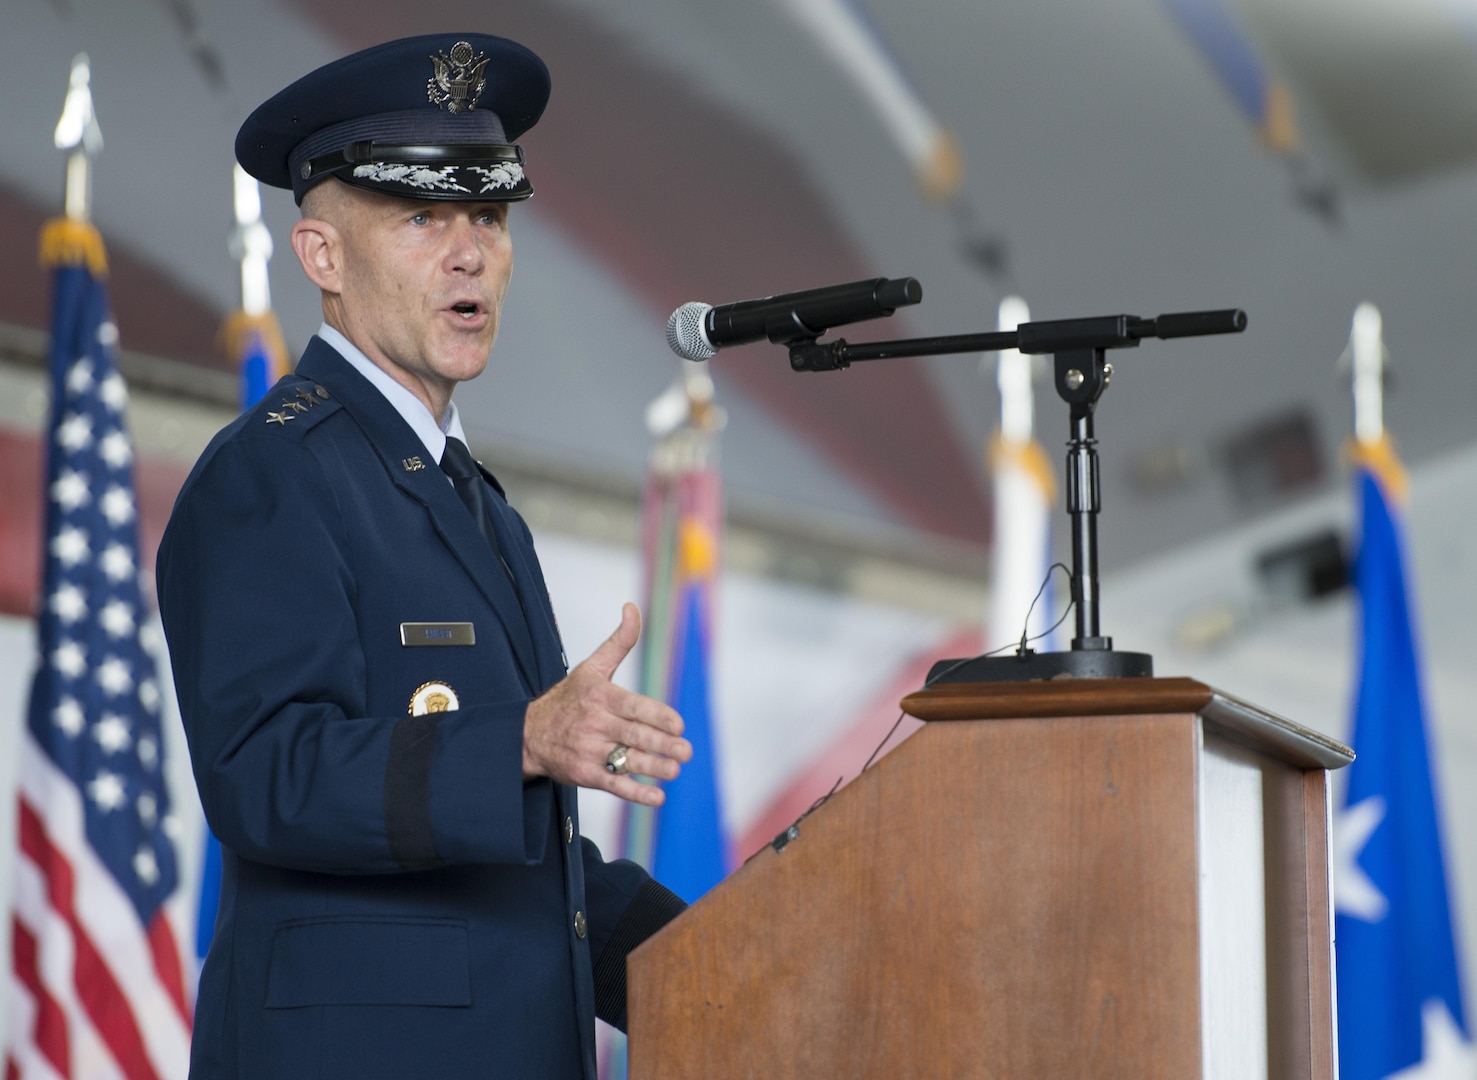 Lt. Gen. Steven Kwast, commander of Air Education and Training Command, officially addresses the men and women of the AETC for the first time as their commander during a change of command ceremony Nov. 16, 2017, at Joint Base San Antonio-Randolph. Kwast, a U.S. Air Force Academy graduate, will pass command of AETC to Lt. Gen. Brad Webb July 26, 2019.